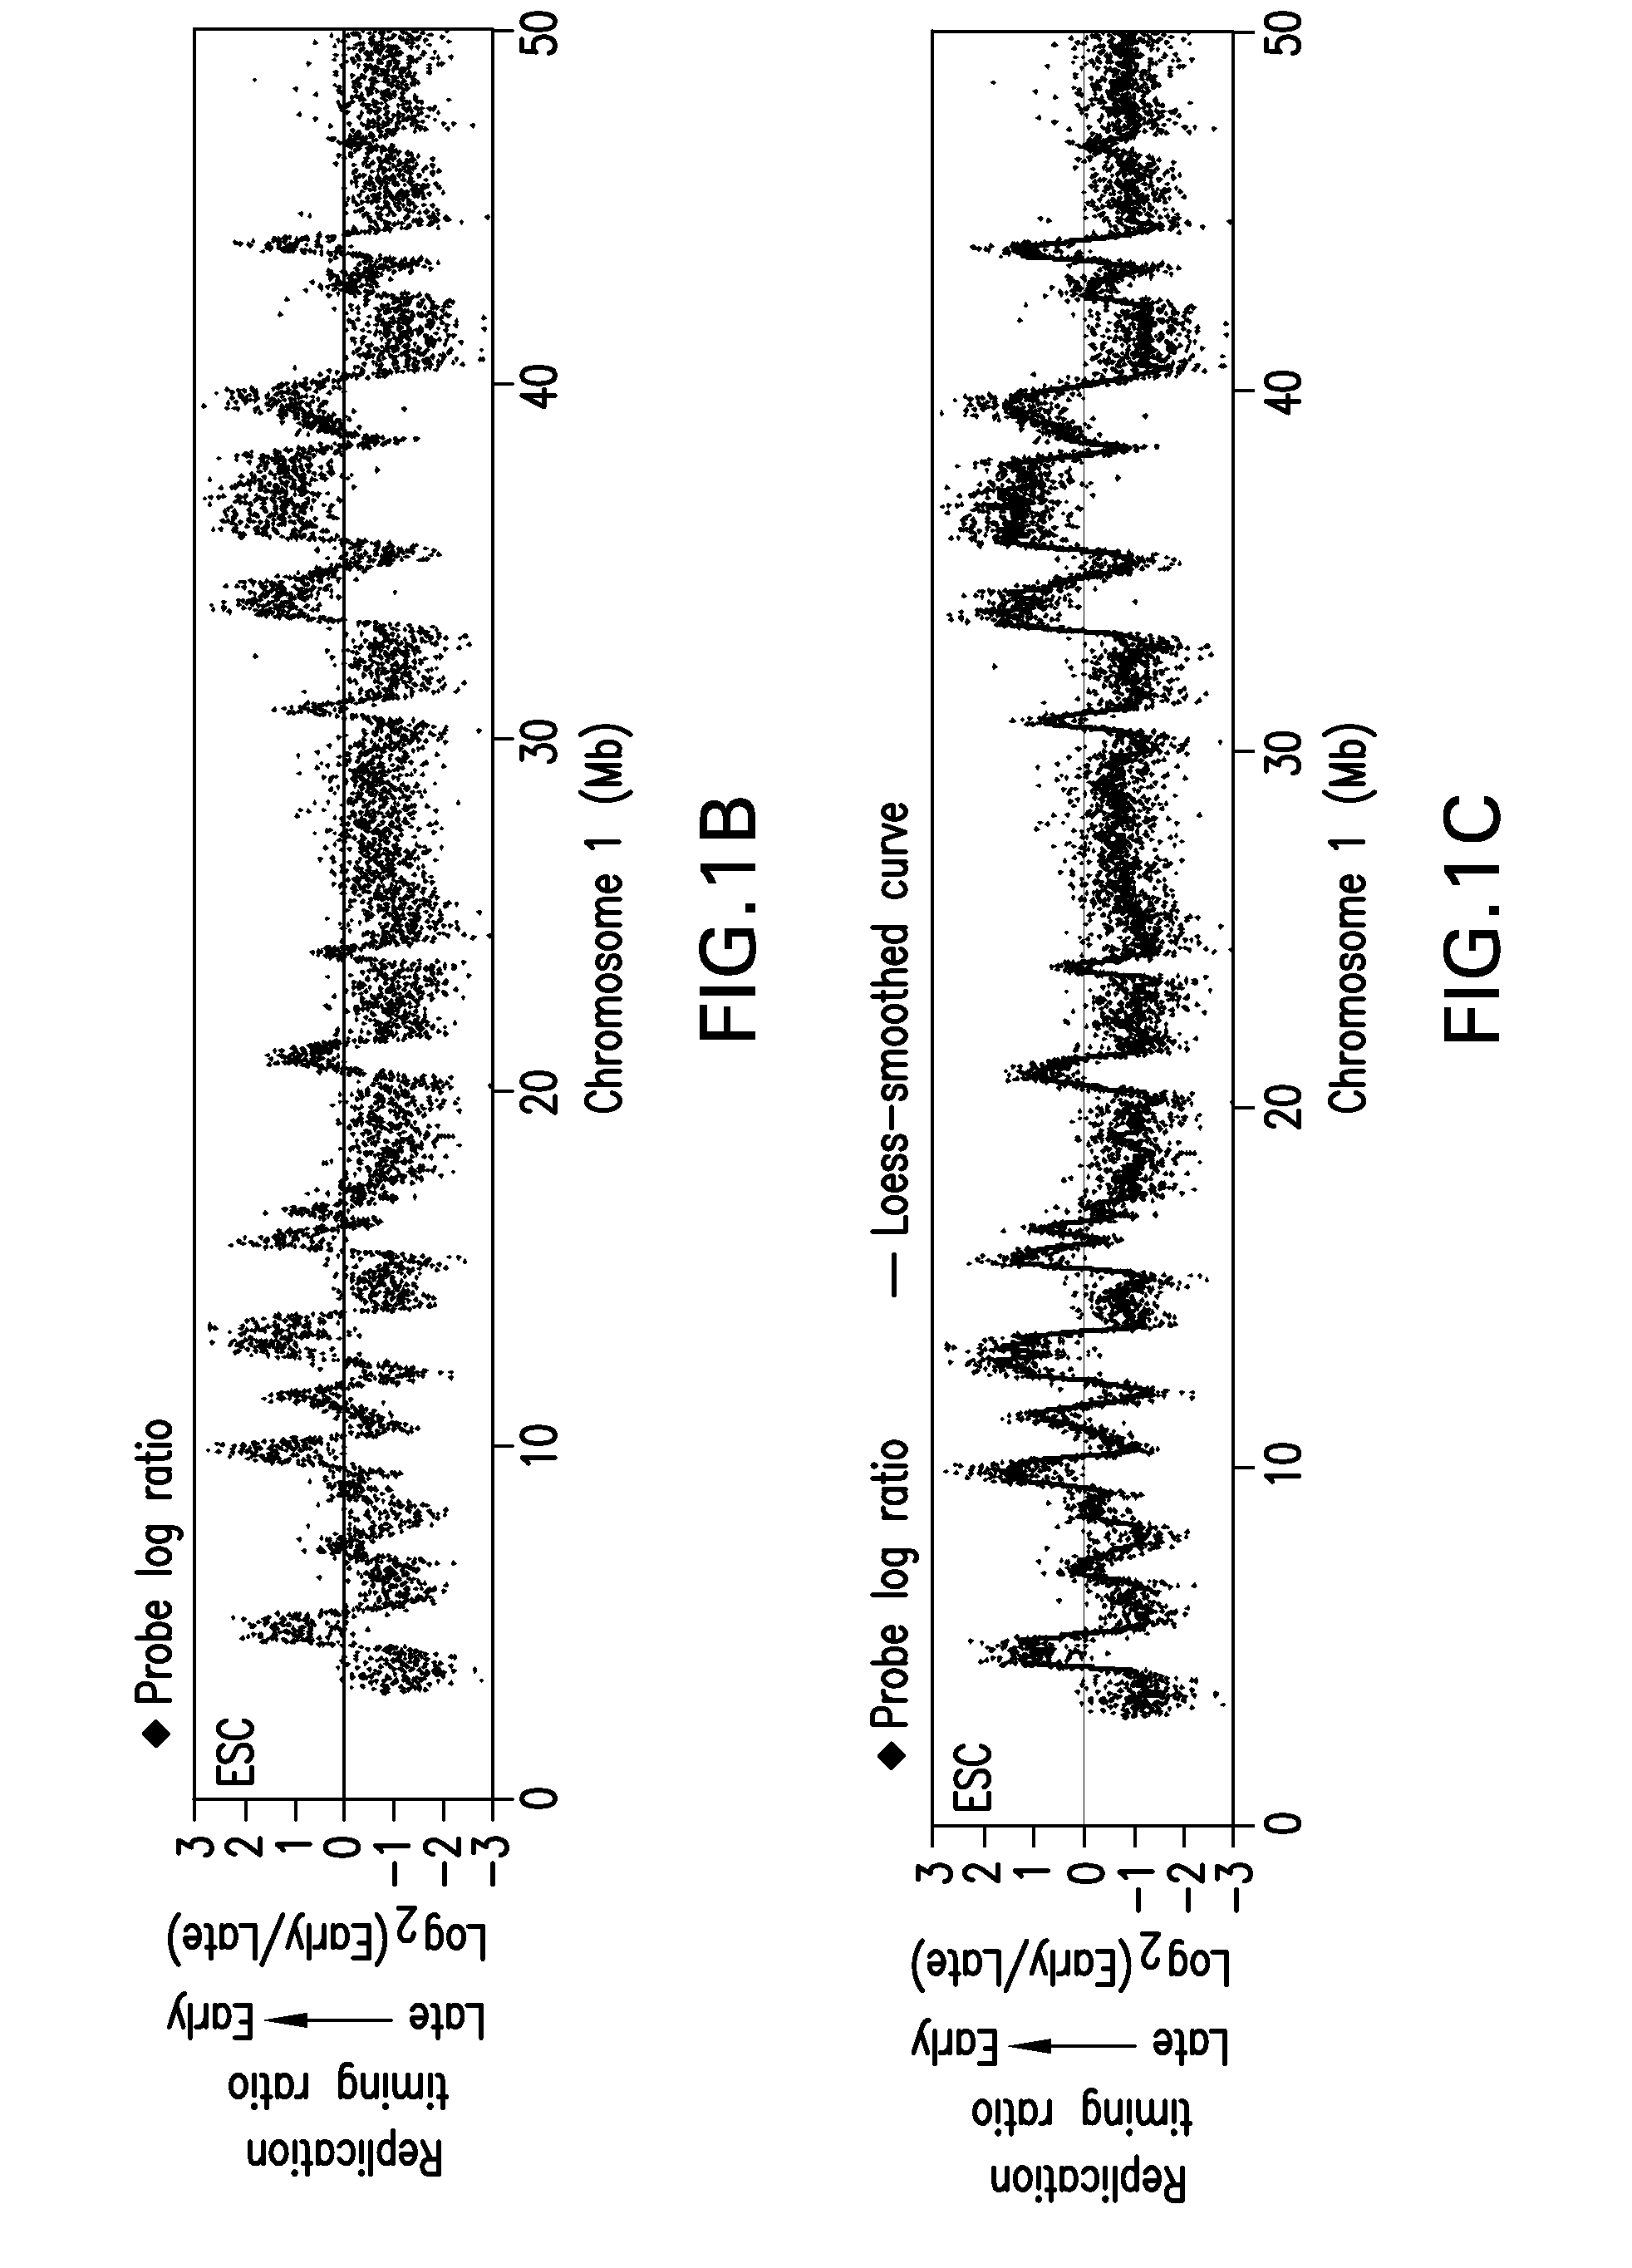 Method for identifying cells based on DNA replication domain timing profiles